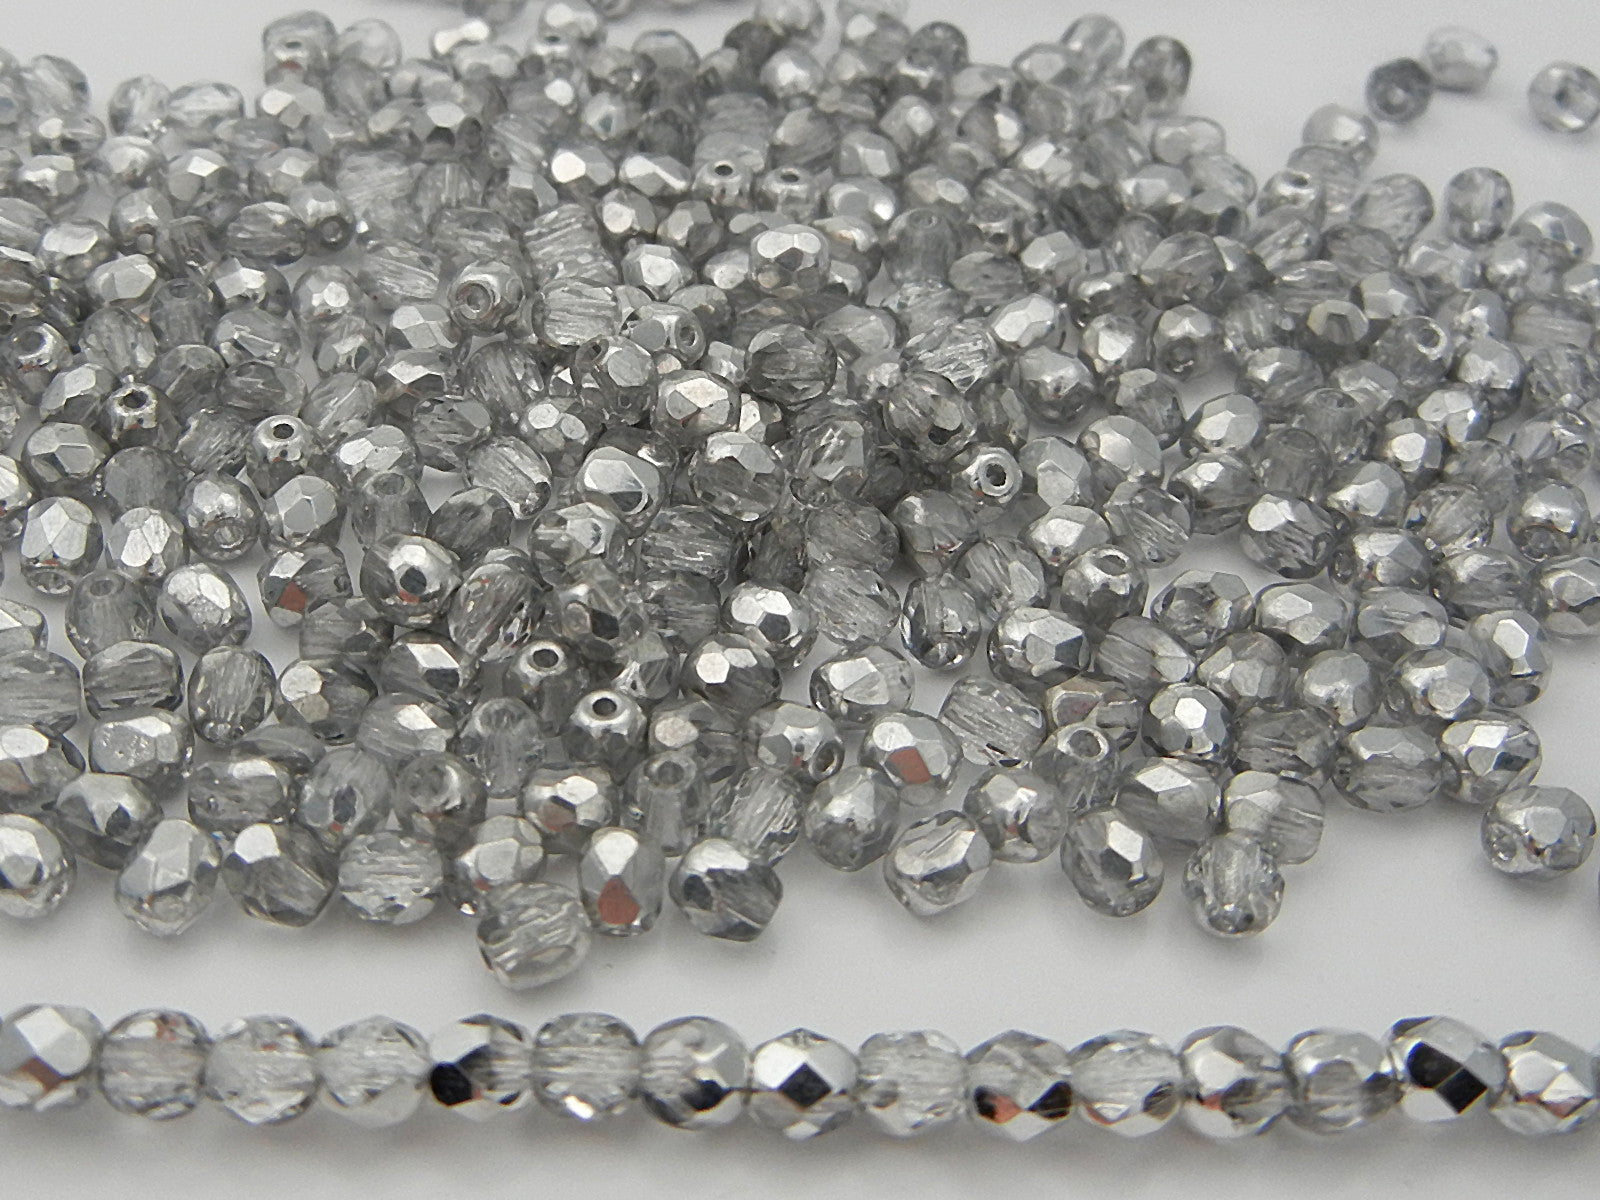 Crystal Labrador CAL half coated, loose Czech Fire Polished Round Faceted Glass Beads, Half Silver 3mm, 4mm, 6mm, 8mm